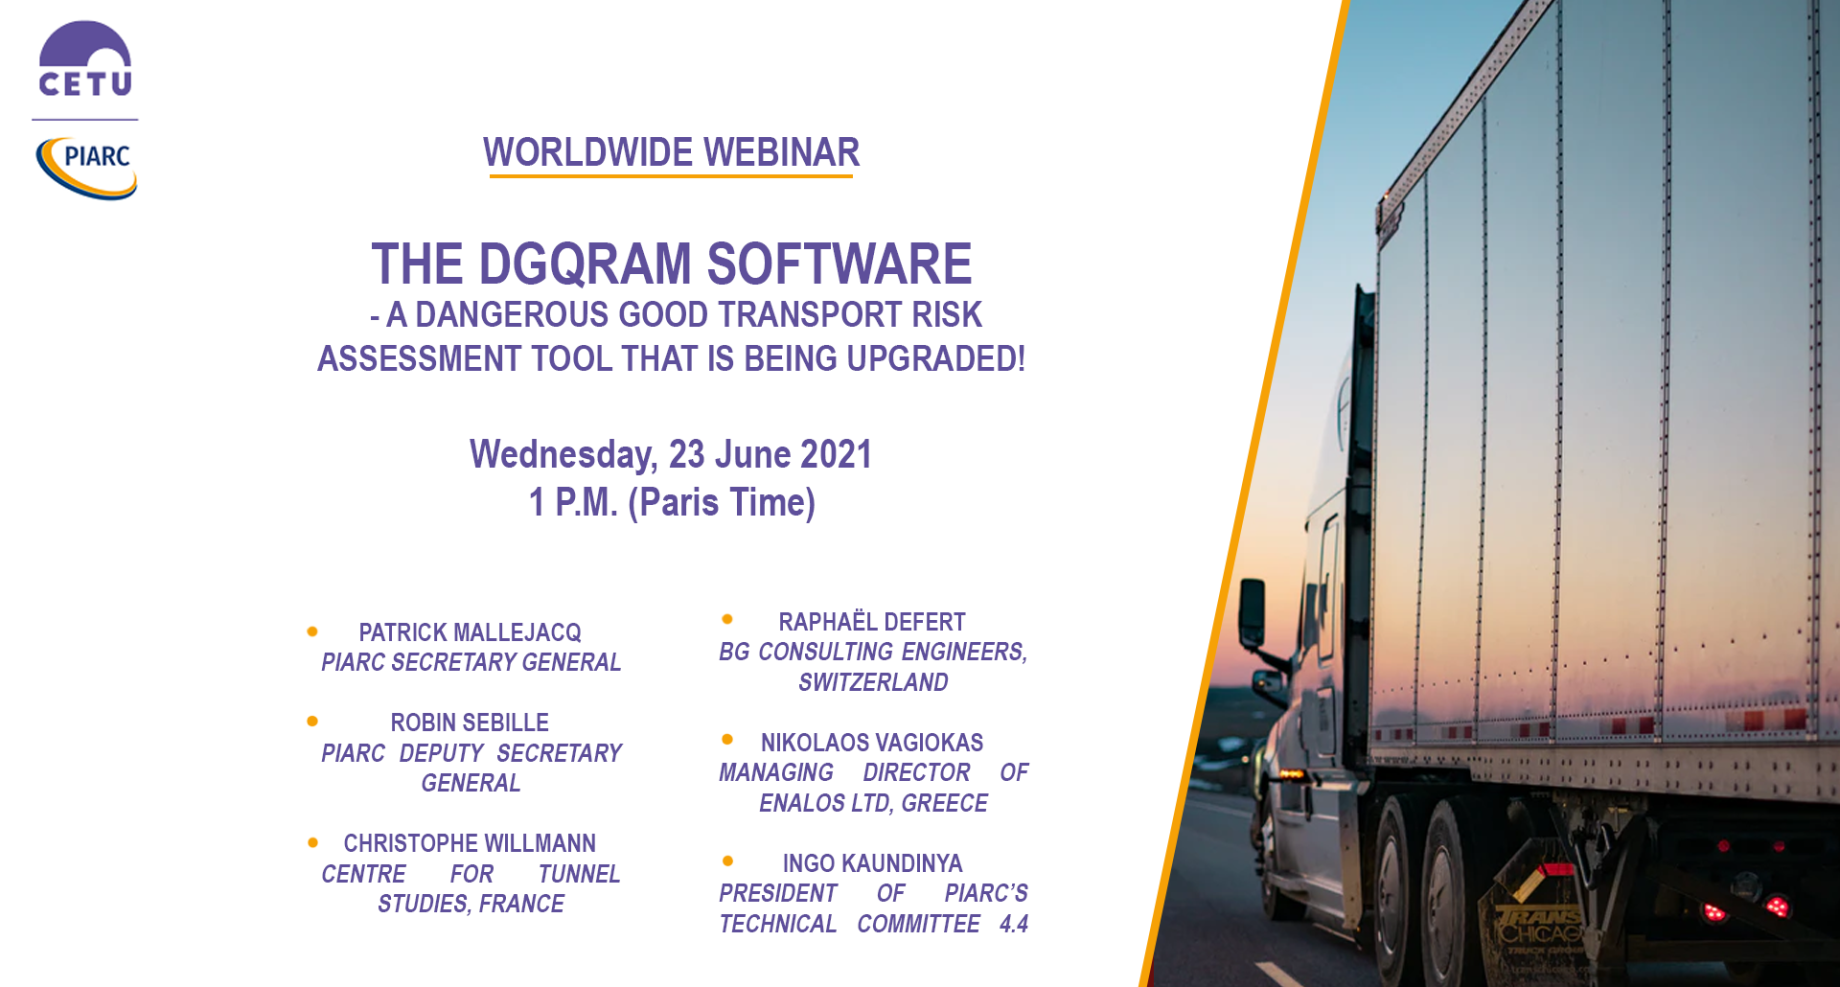 Discover PIARC’s updated Dangerous Goods Risk Assessment in Tunnels (DG-QRAM) software at this next webinar on 23 June